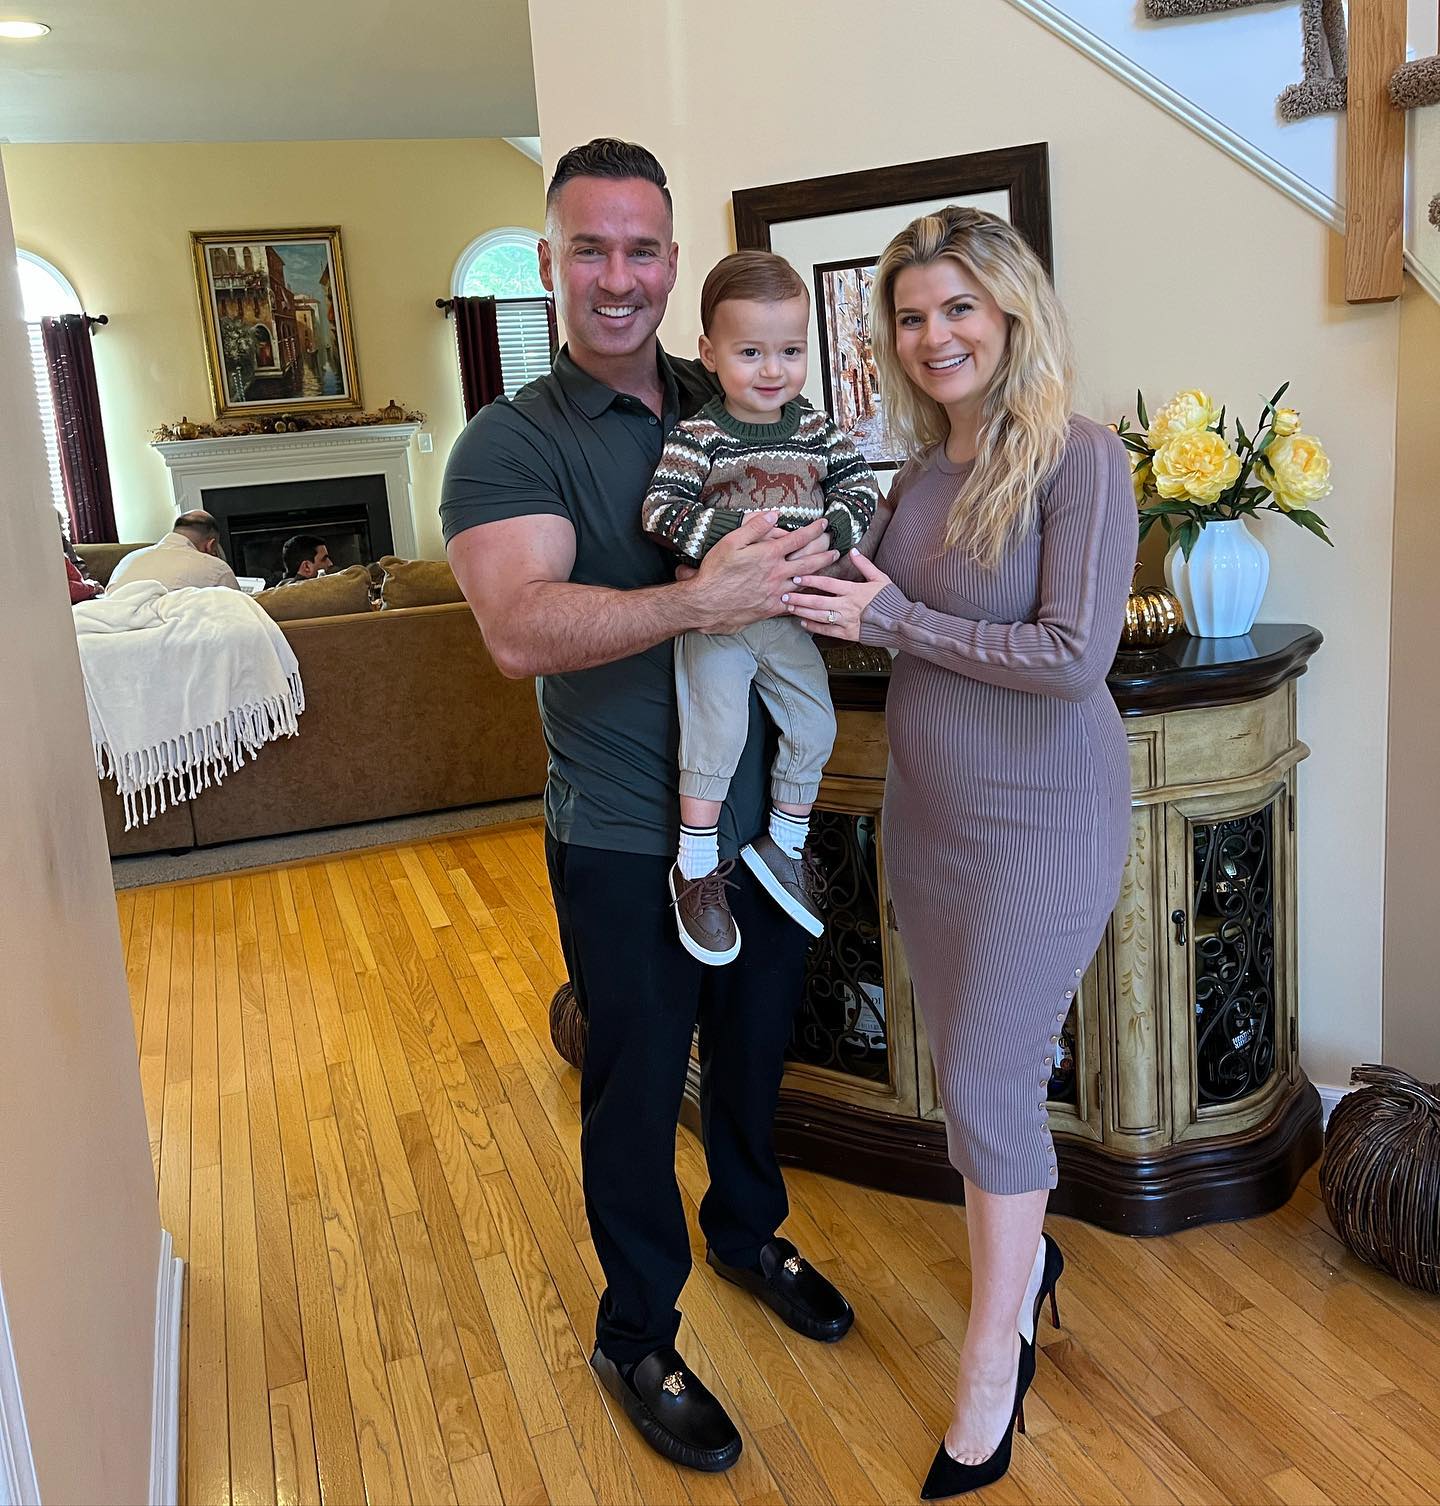 Mike and Lauren Sorrentino with their son, Romeo Reign